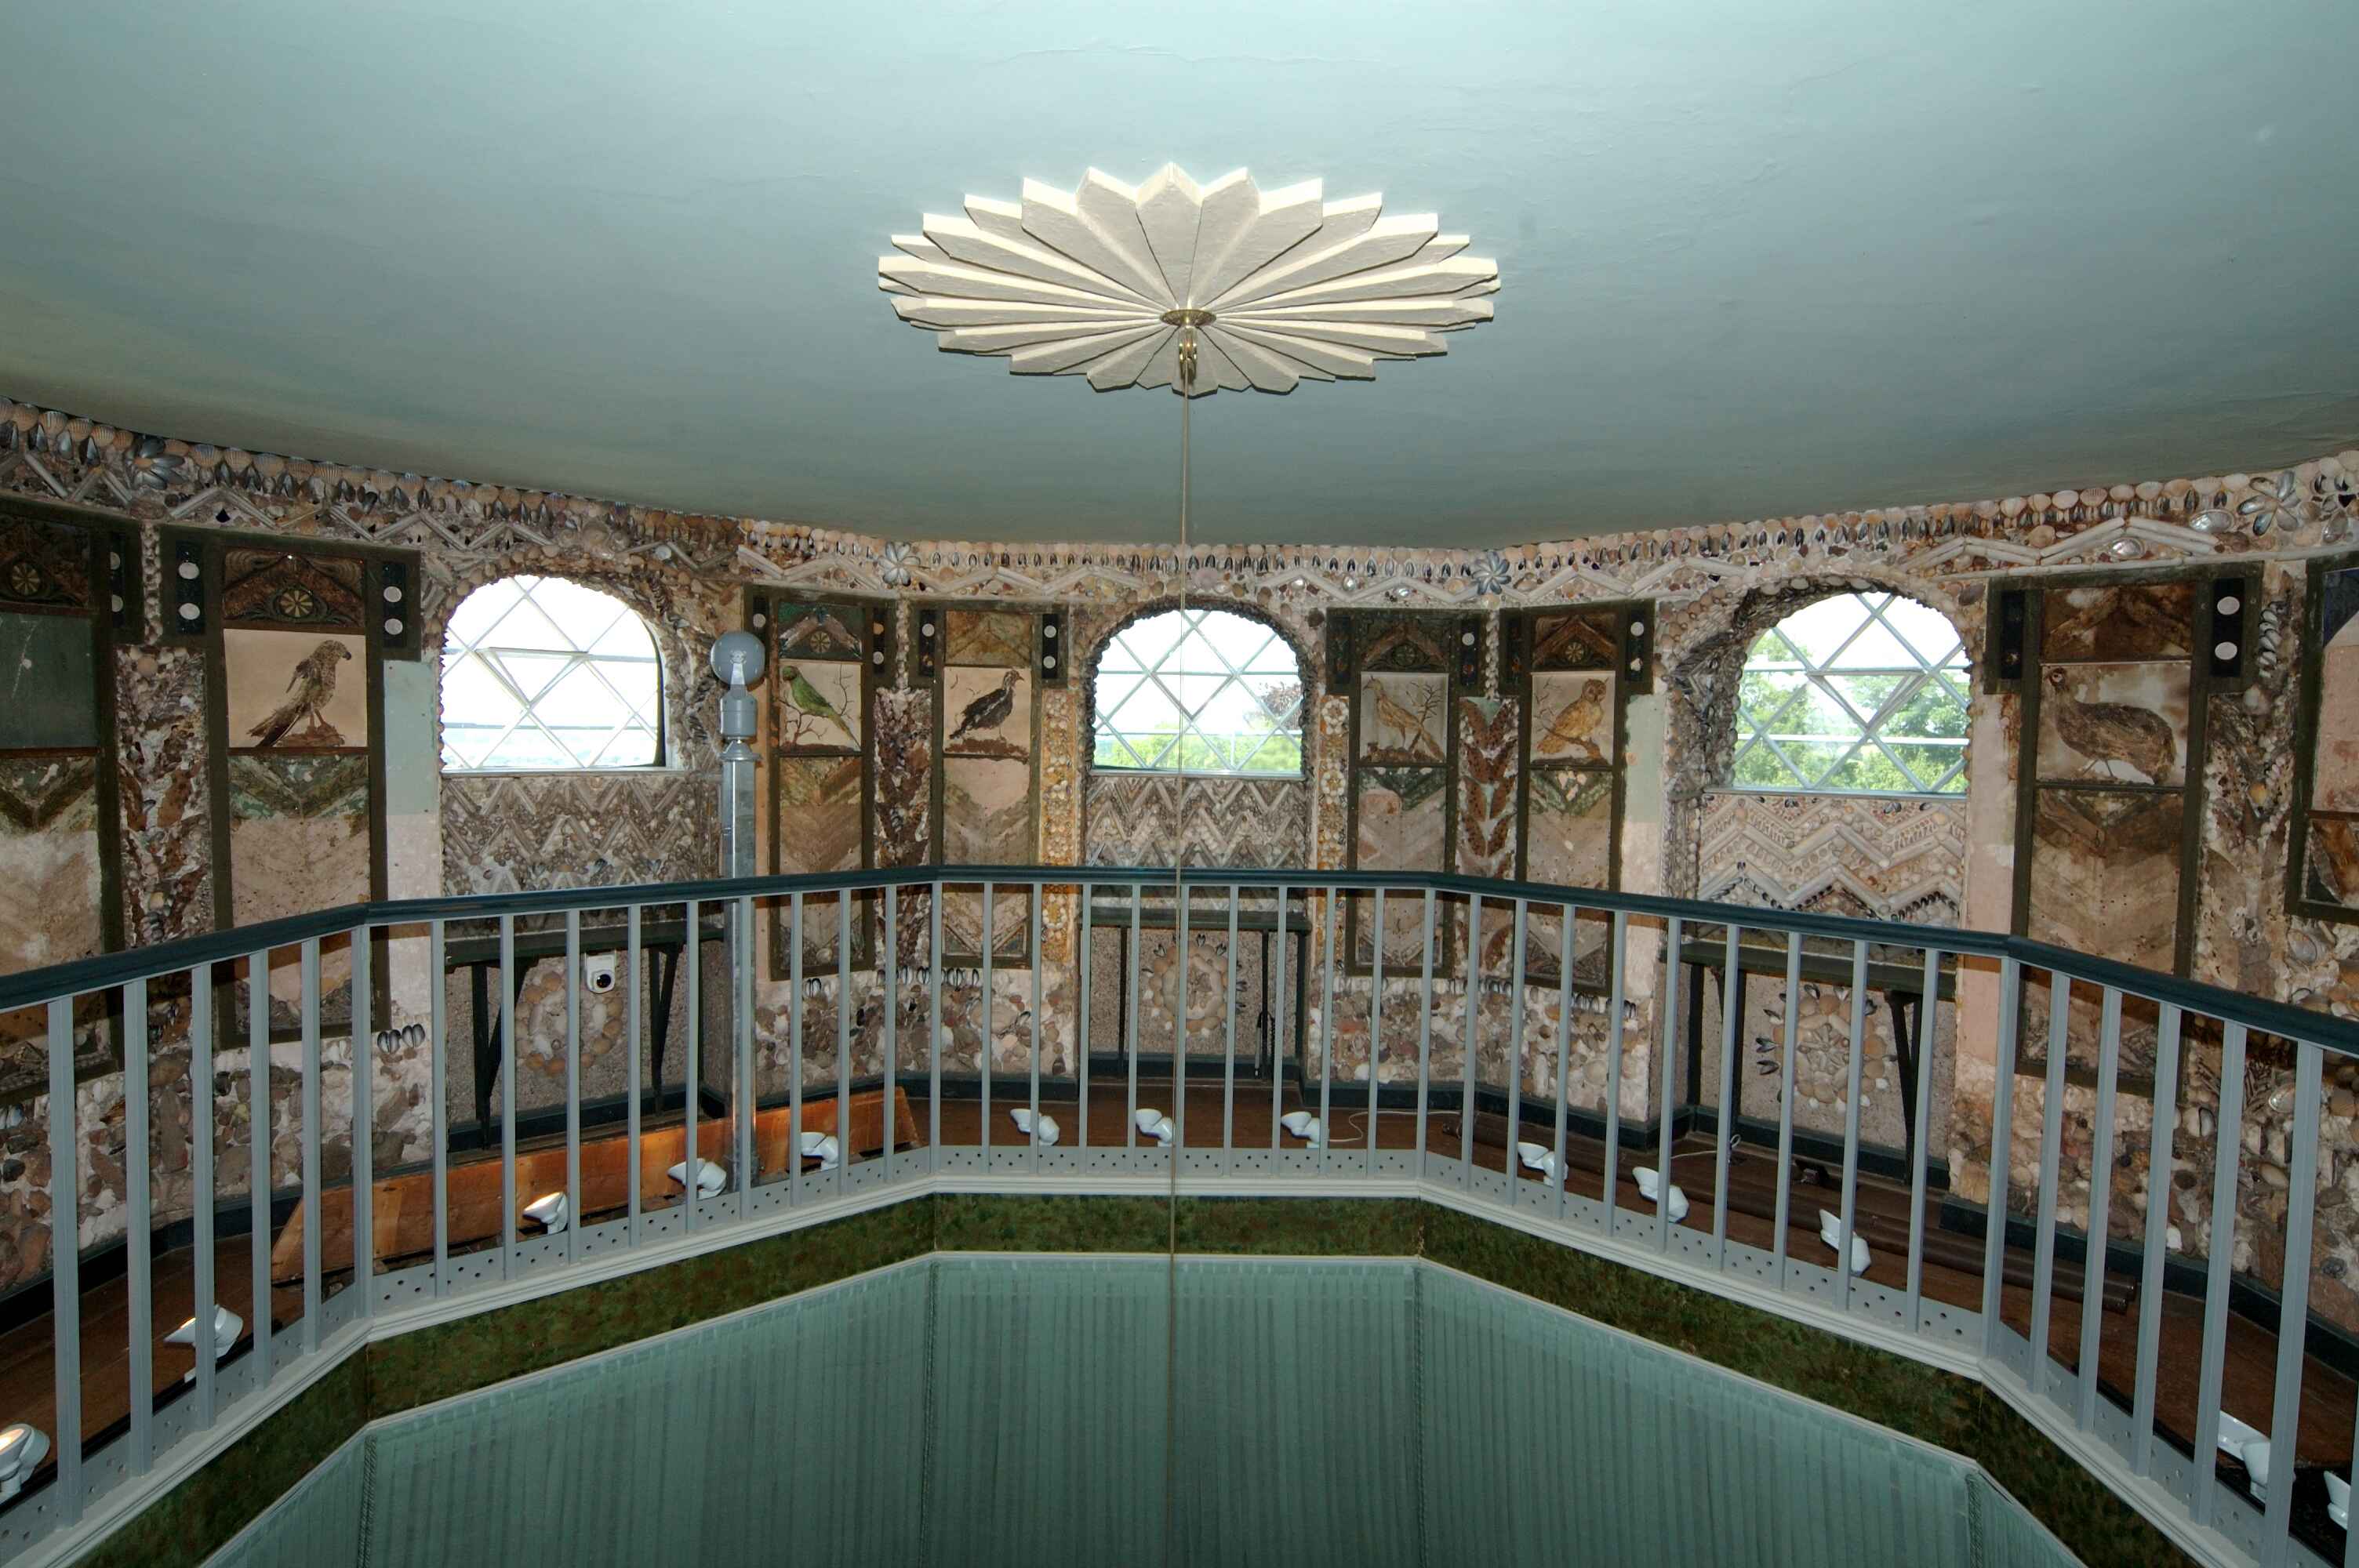 Gallery with railings and walls decorated with shells